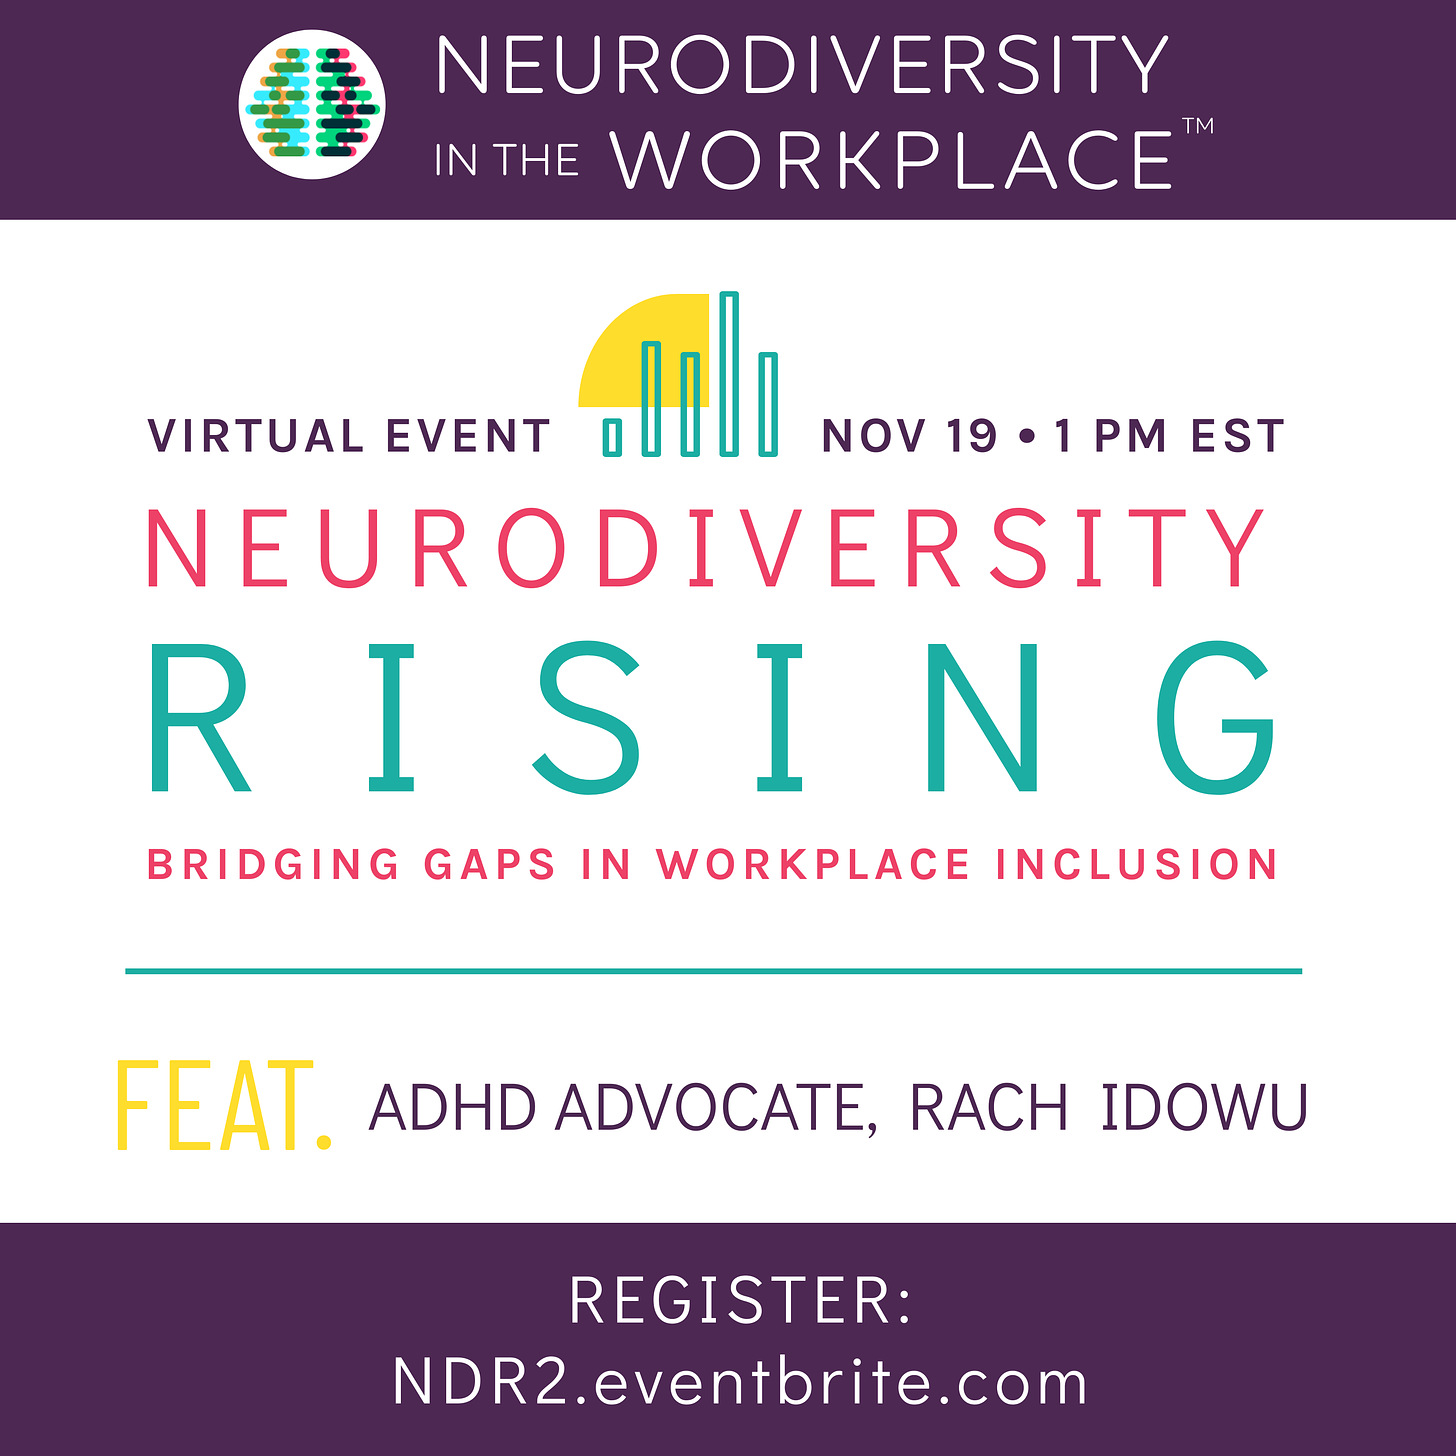 Event flyer for the Neurodiversity in the Workplace event. Which includes the date of the event, my name, and the registration link